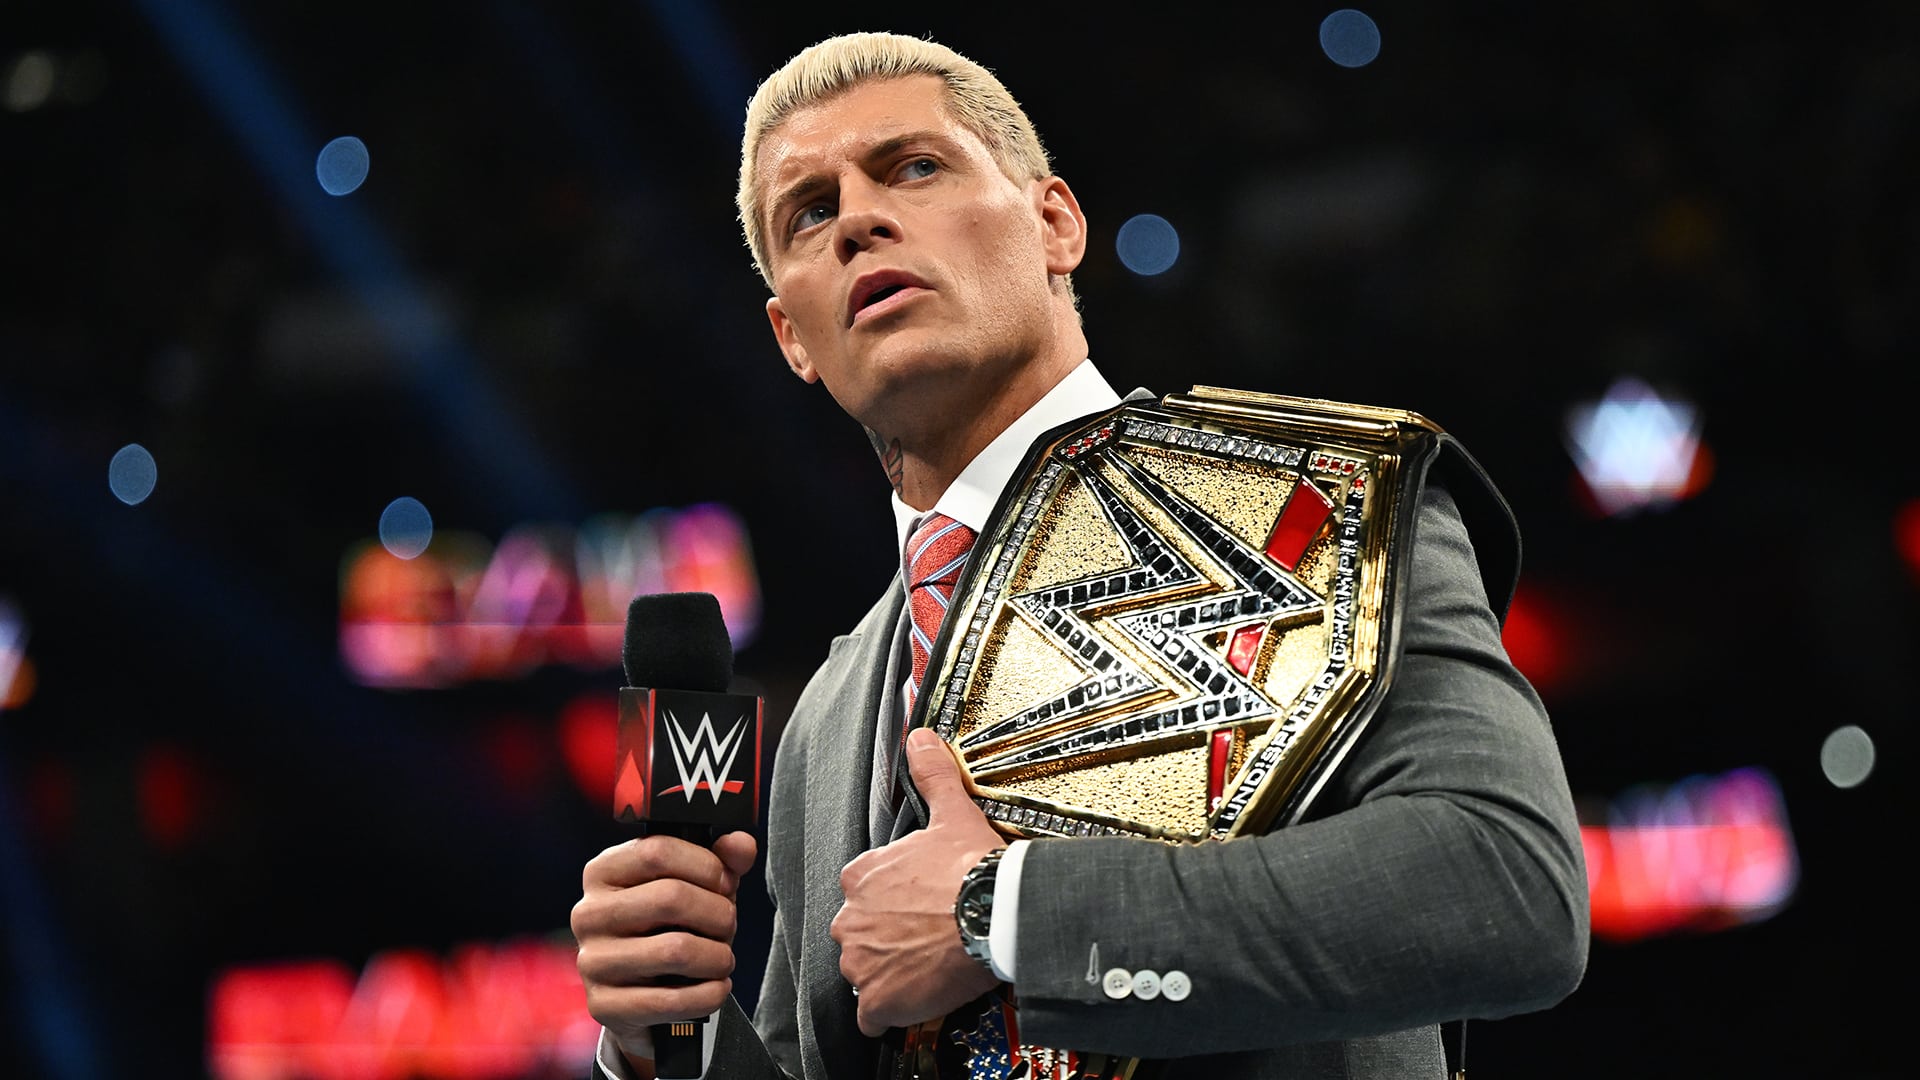 Kevin Nash Thinks Cody Rhodes’ Popularity Makes a Heel Turn Unlikely